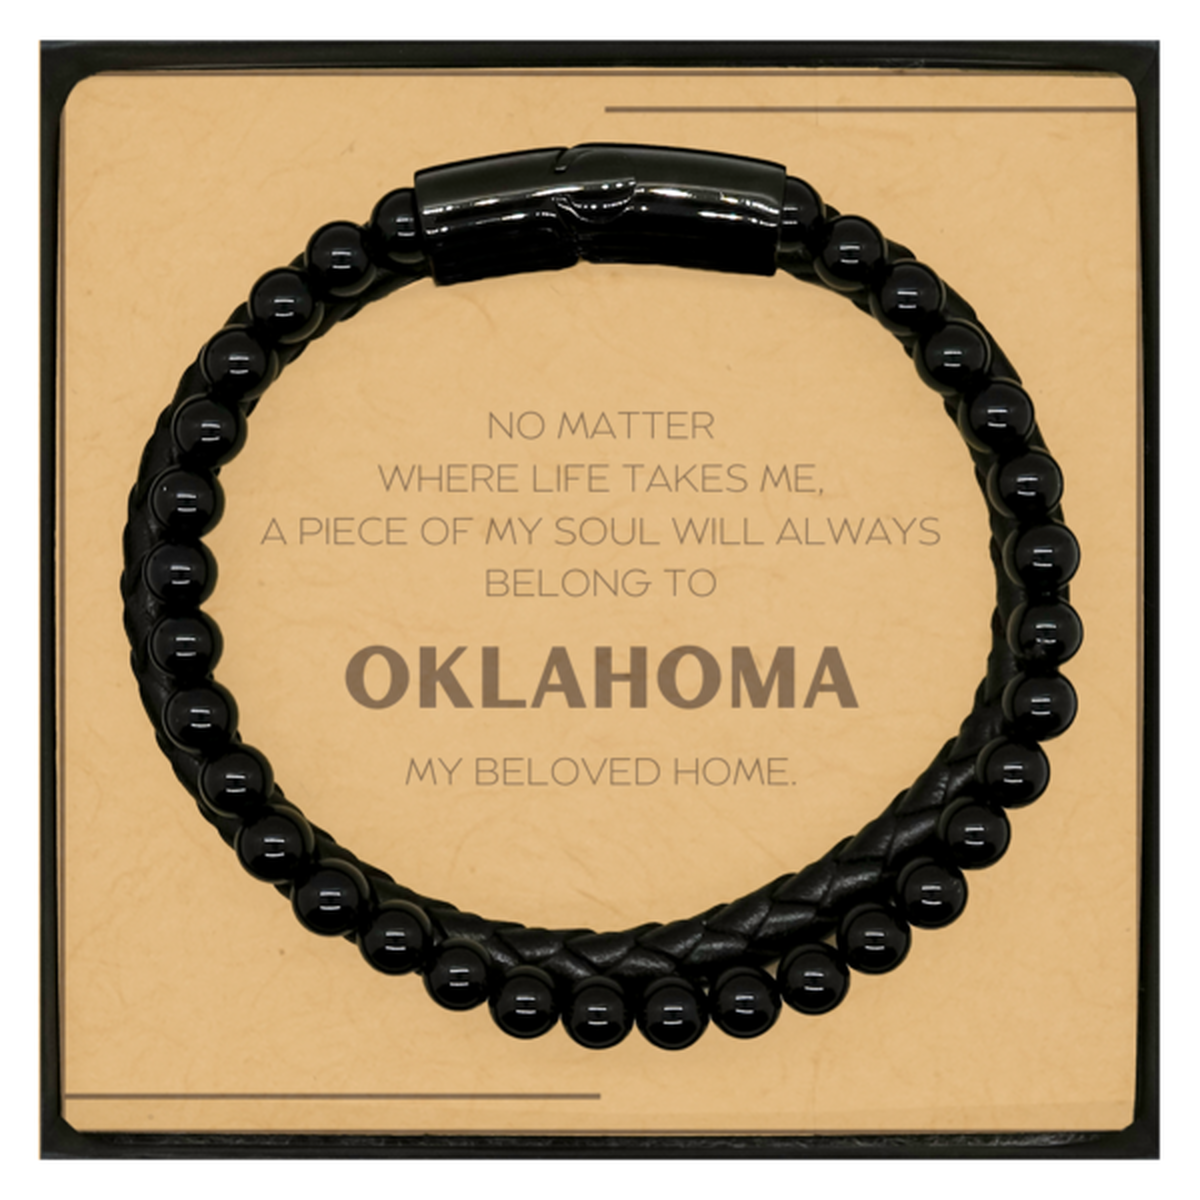 Love Oklahoma State Gifts, My soul will always belong to Oklahoma, Proud Stone Leather Bracelets, Birthday Christmas Unique Gifts For Oklahoma Men, Women, Friends